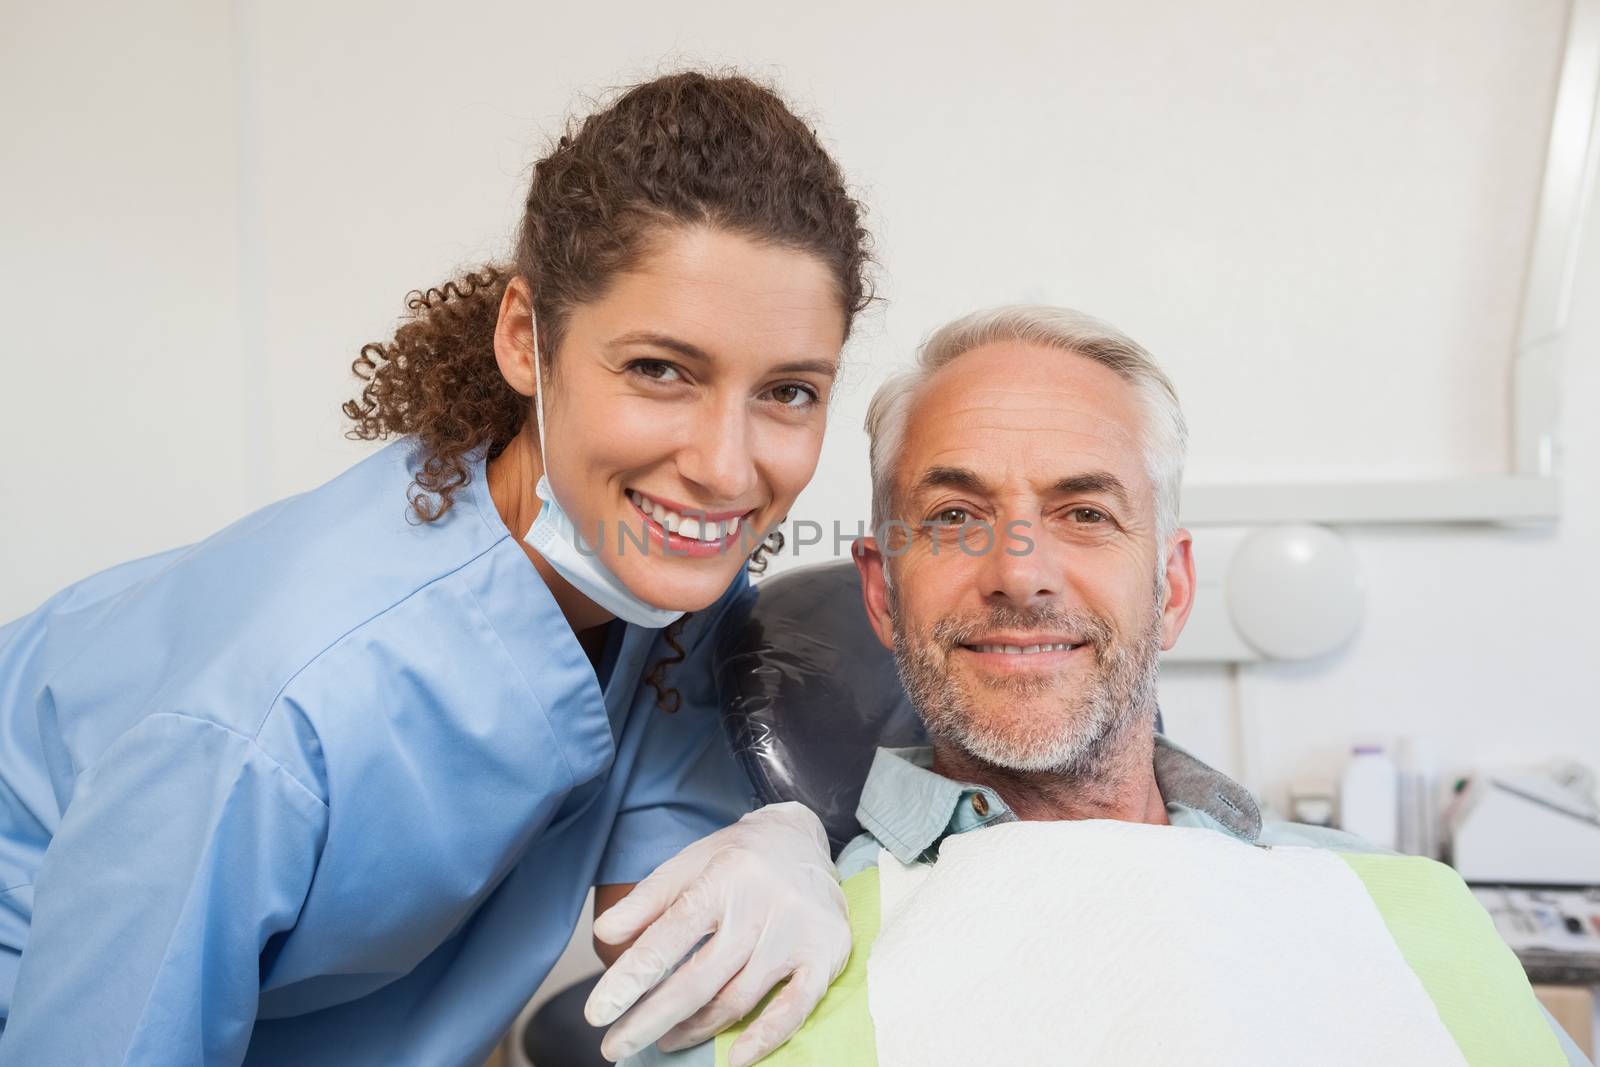 Dentist and patient smiling at camera at the dental clinic